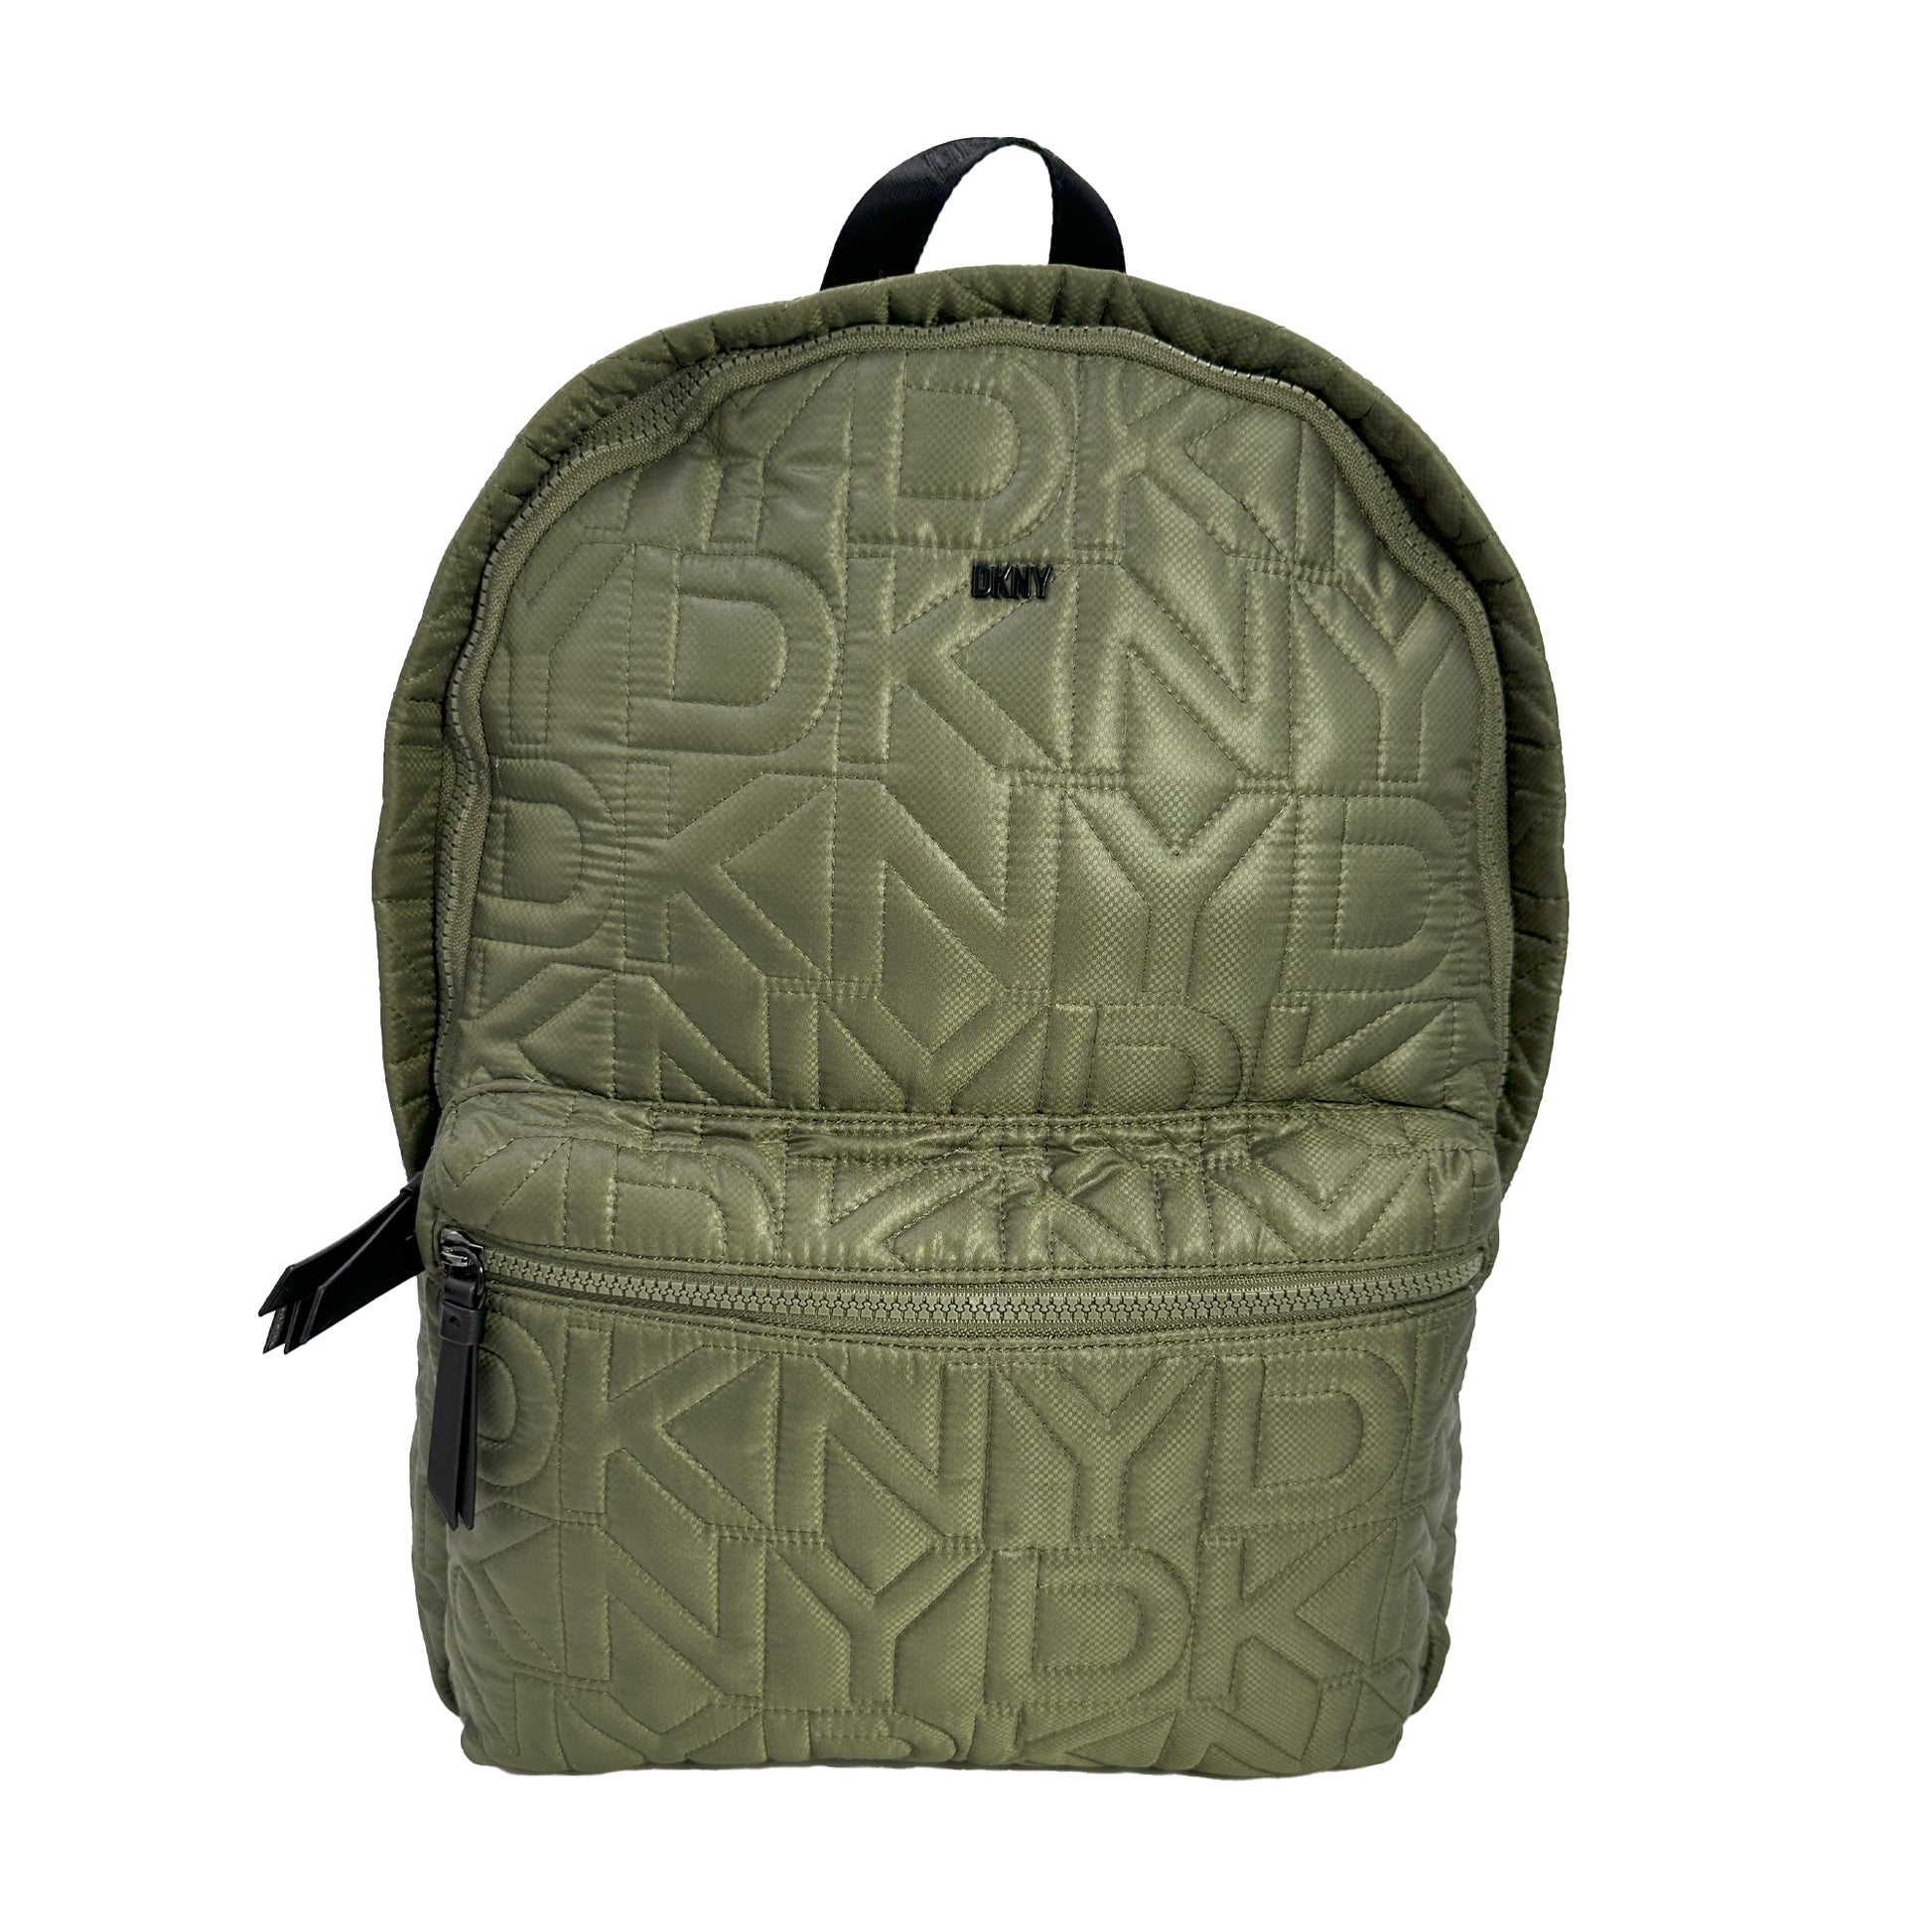 DKNY Meghan Quilted Large Backpack - Green - 755404237018